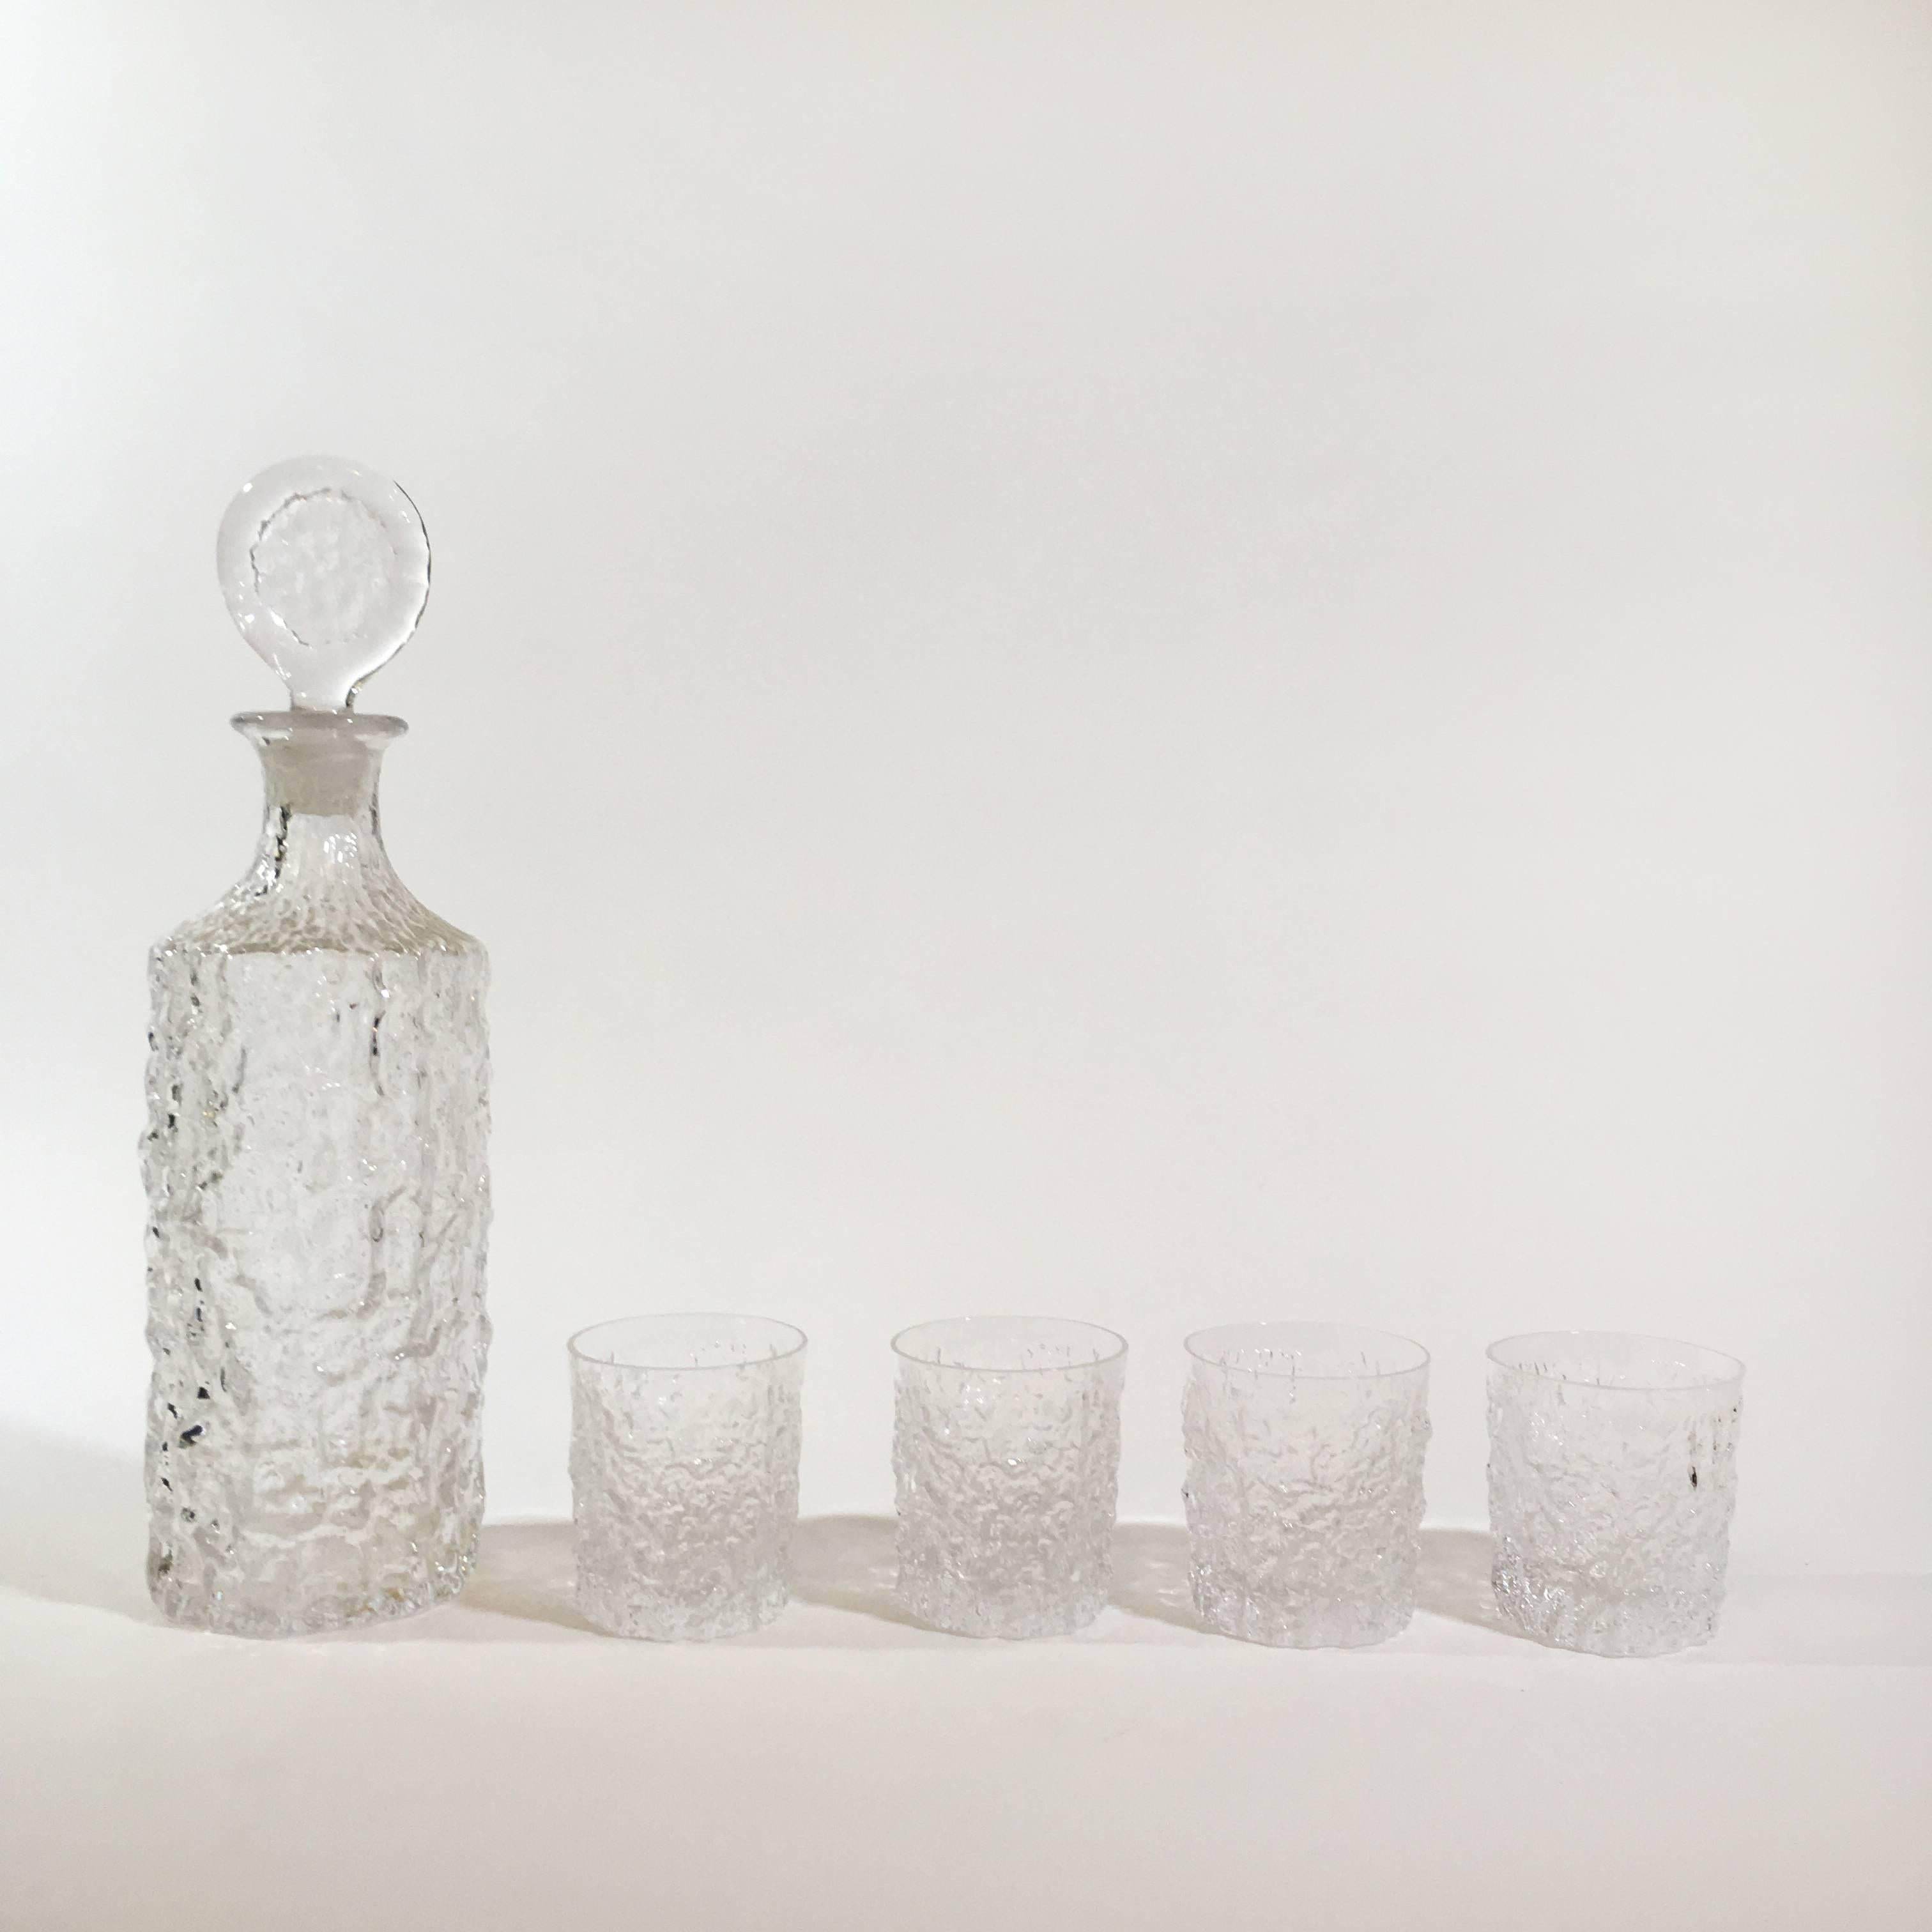 British 1970s Whitefriars Glacier Decanter with Four Rocks Glasses